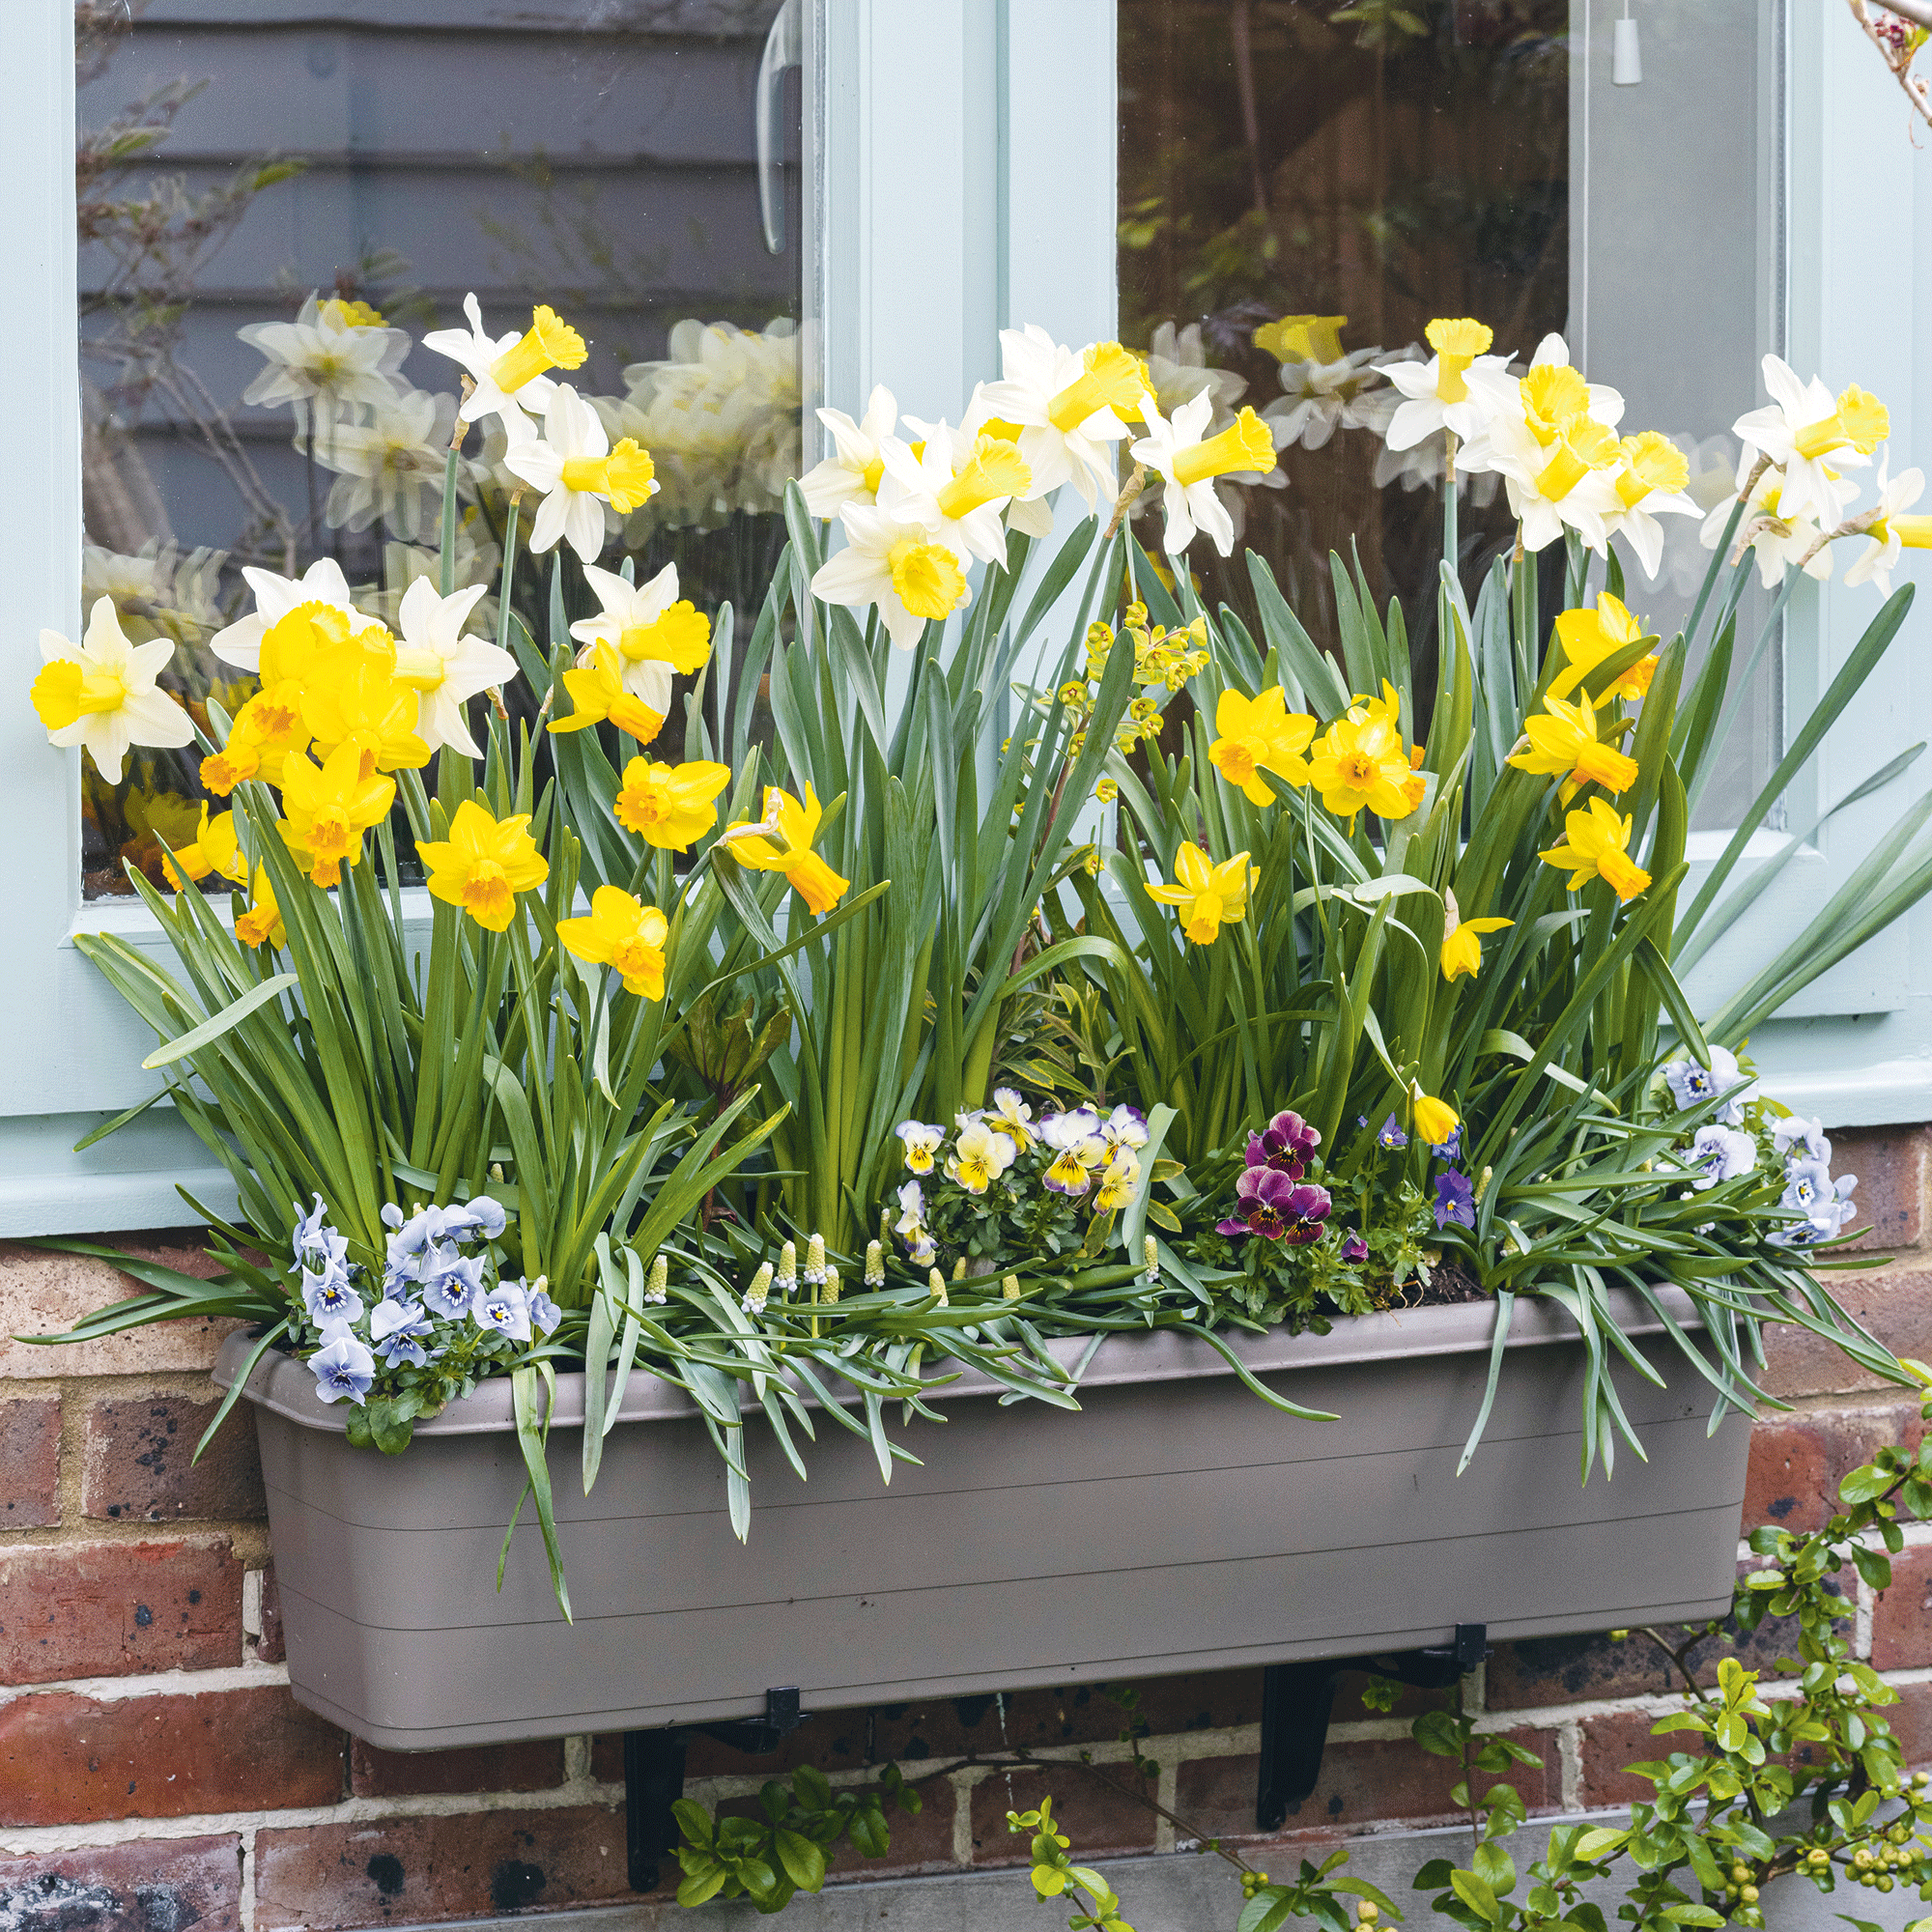 Experts warn against these 10 easily avoided window box mistakes